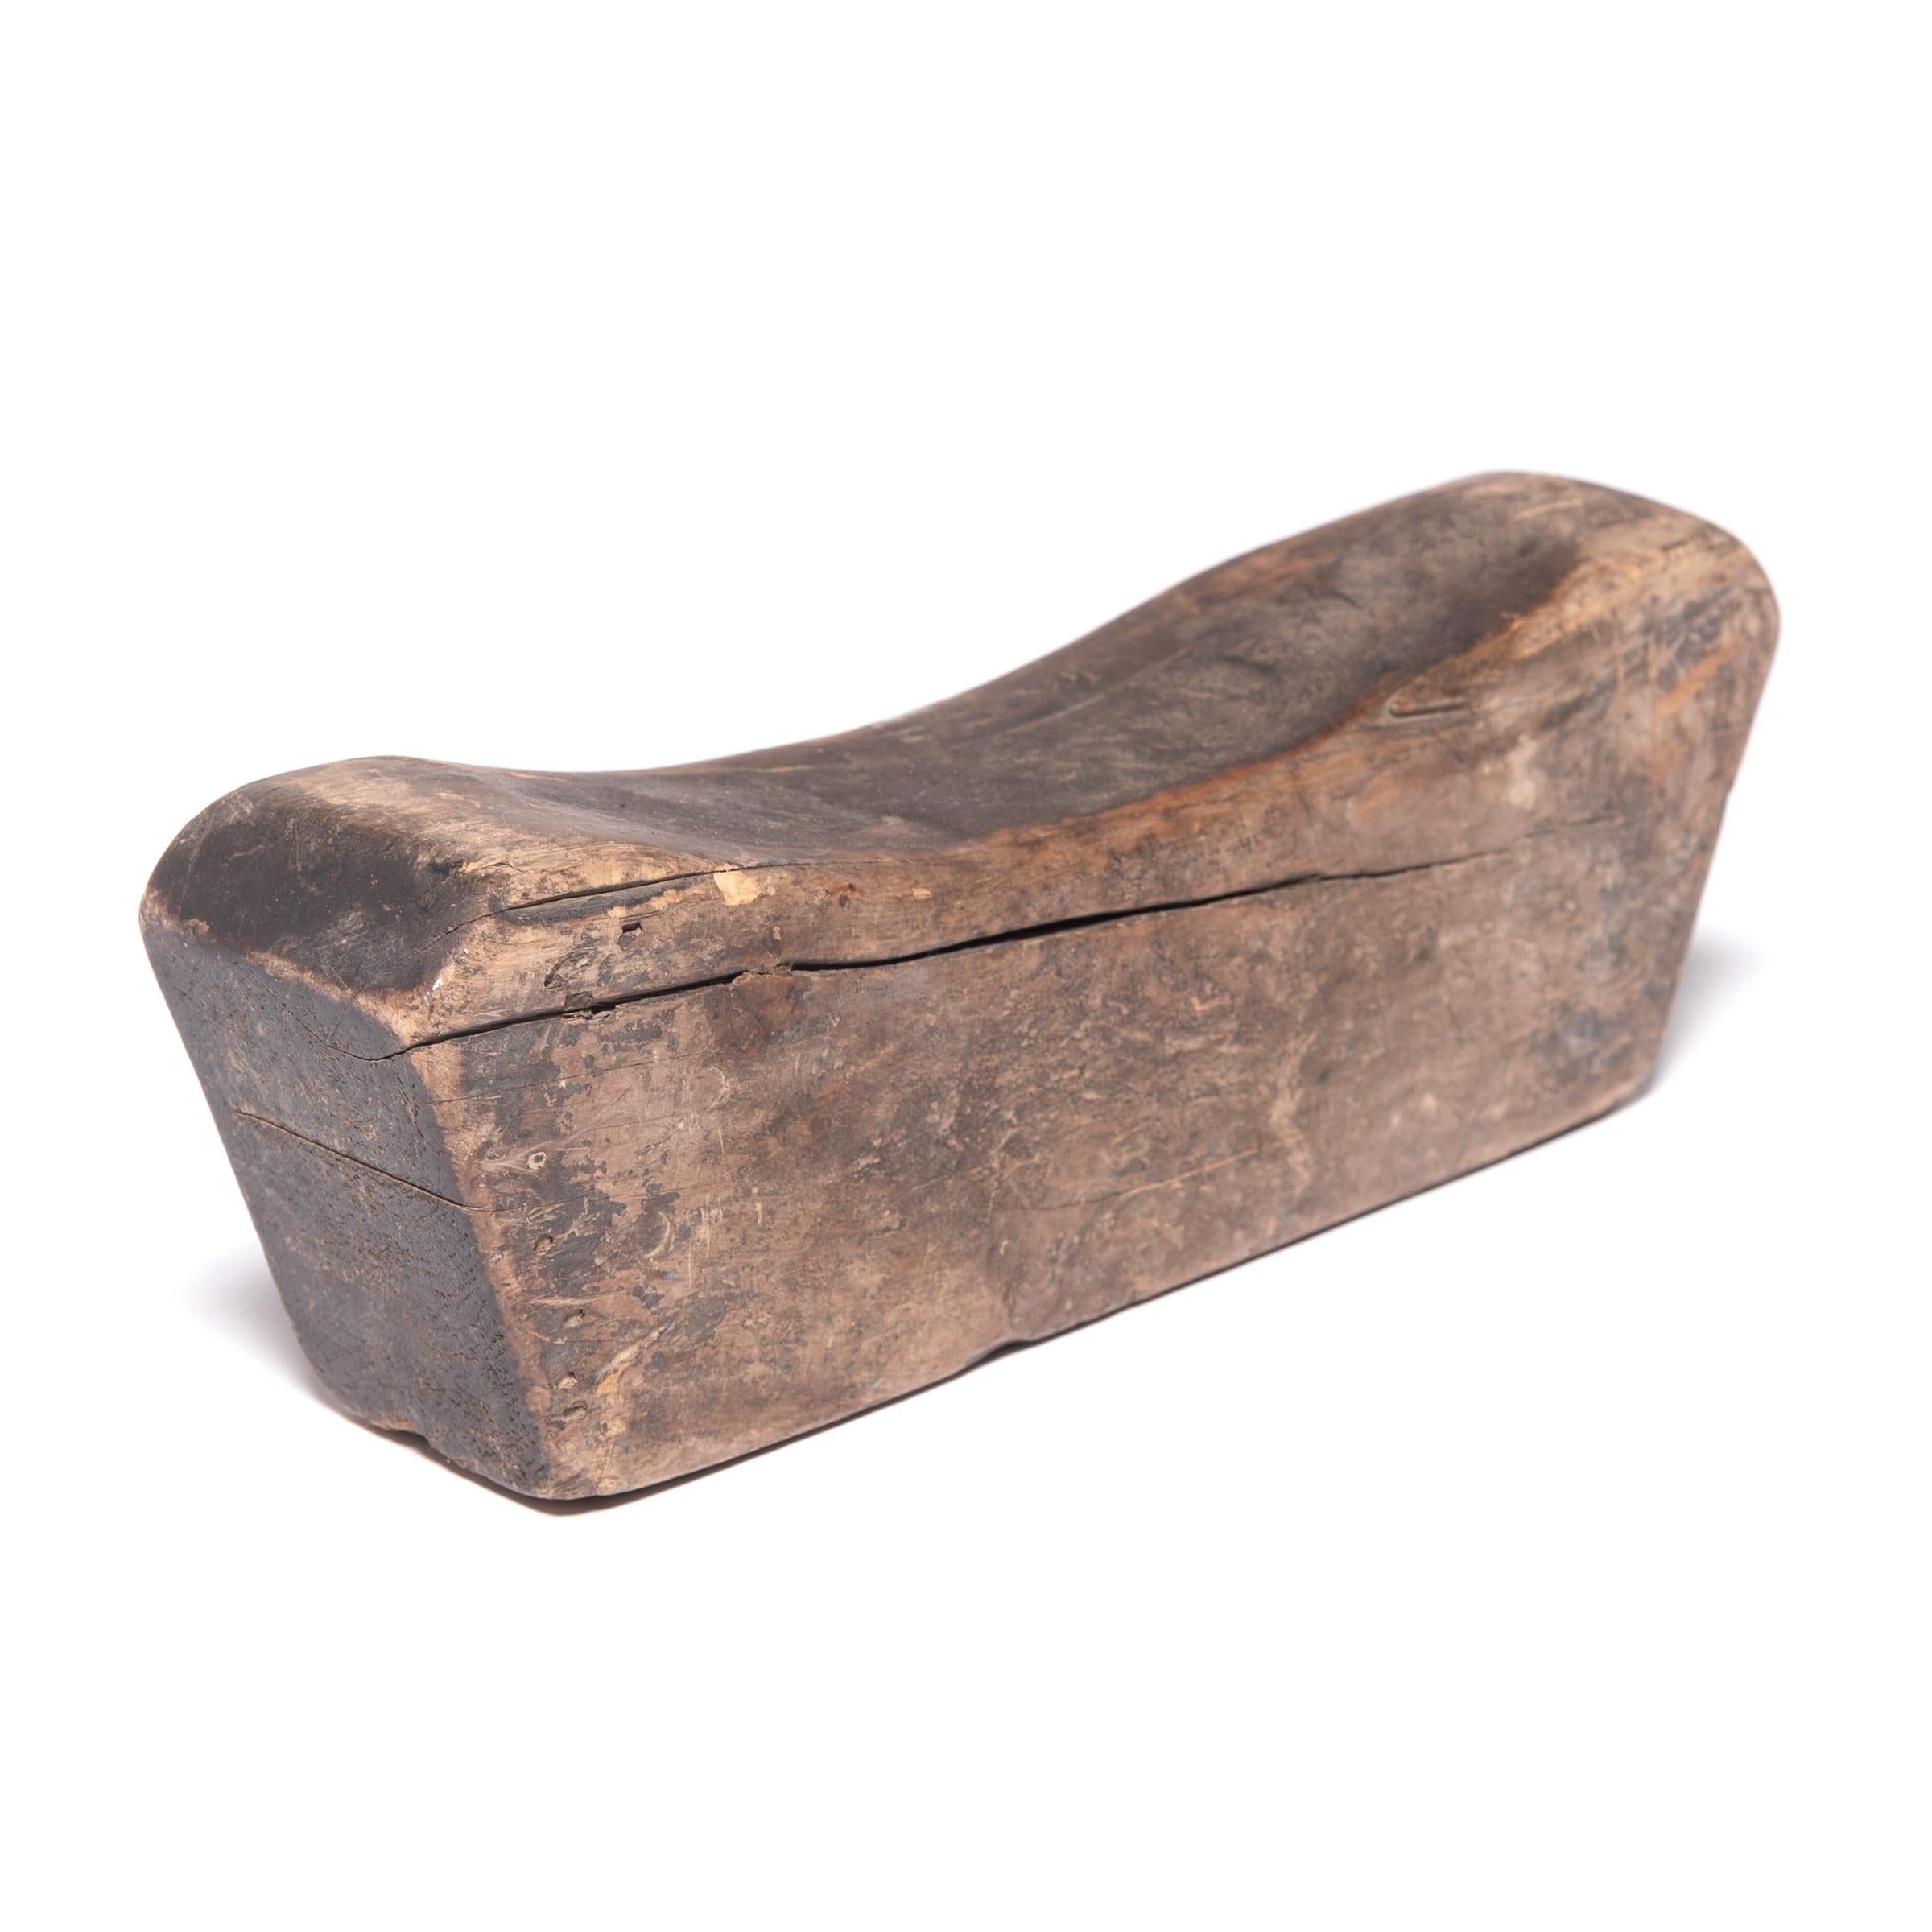 Made of Chinese northern elmwood, this smooth block of wood was once used as a rigid headrest or neck pillow. The soft curve and height of the block not only supported the head while sleeping, it also helped to hold the body in good posture and